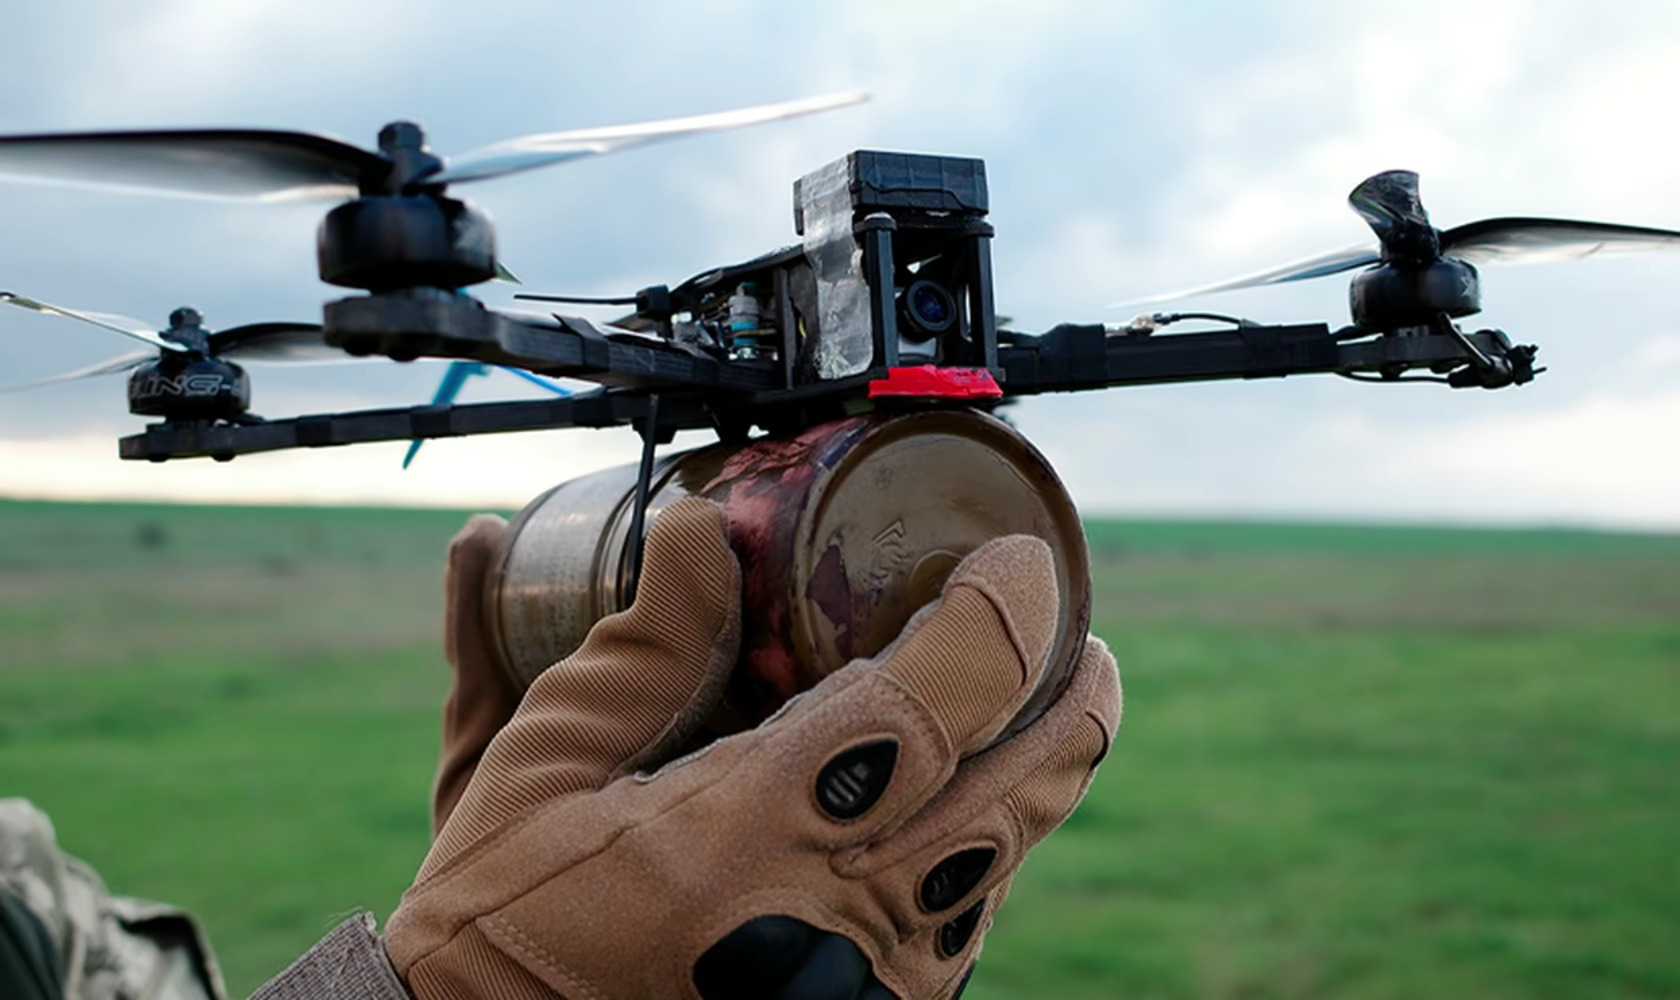 s-up-a-small-quadcopter-strapped-with-an-explosive.jpg